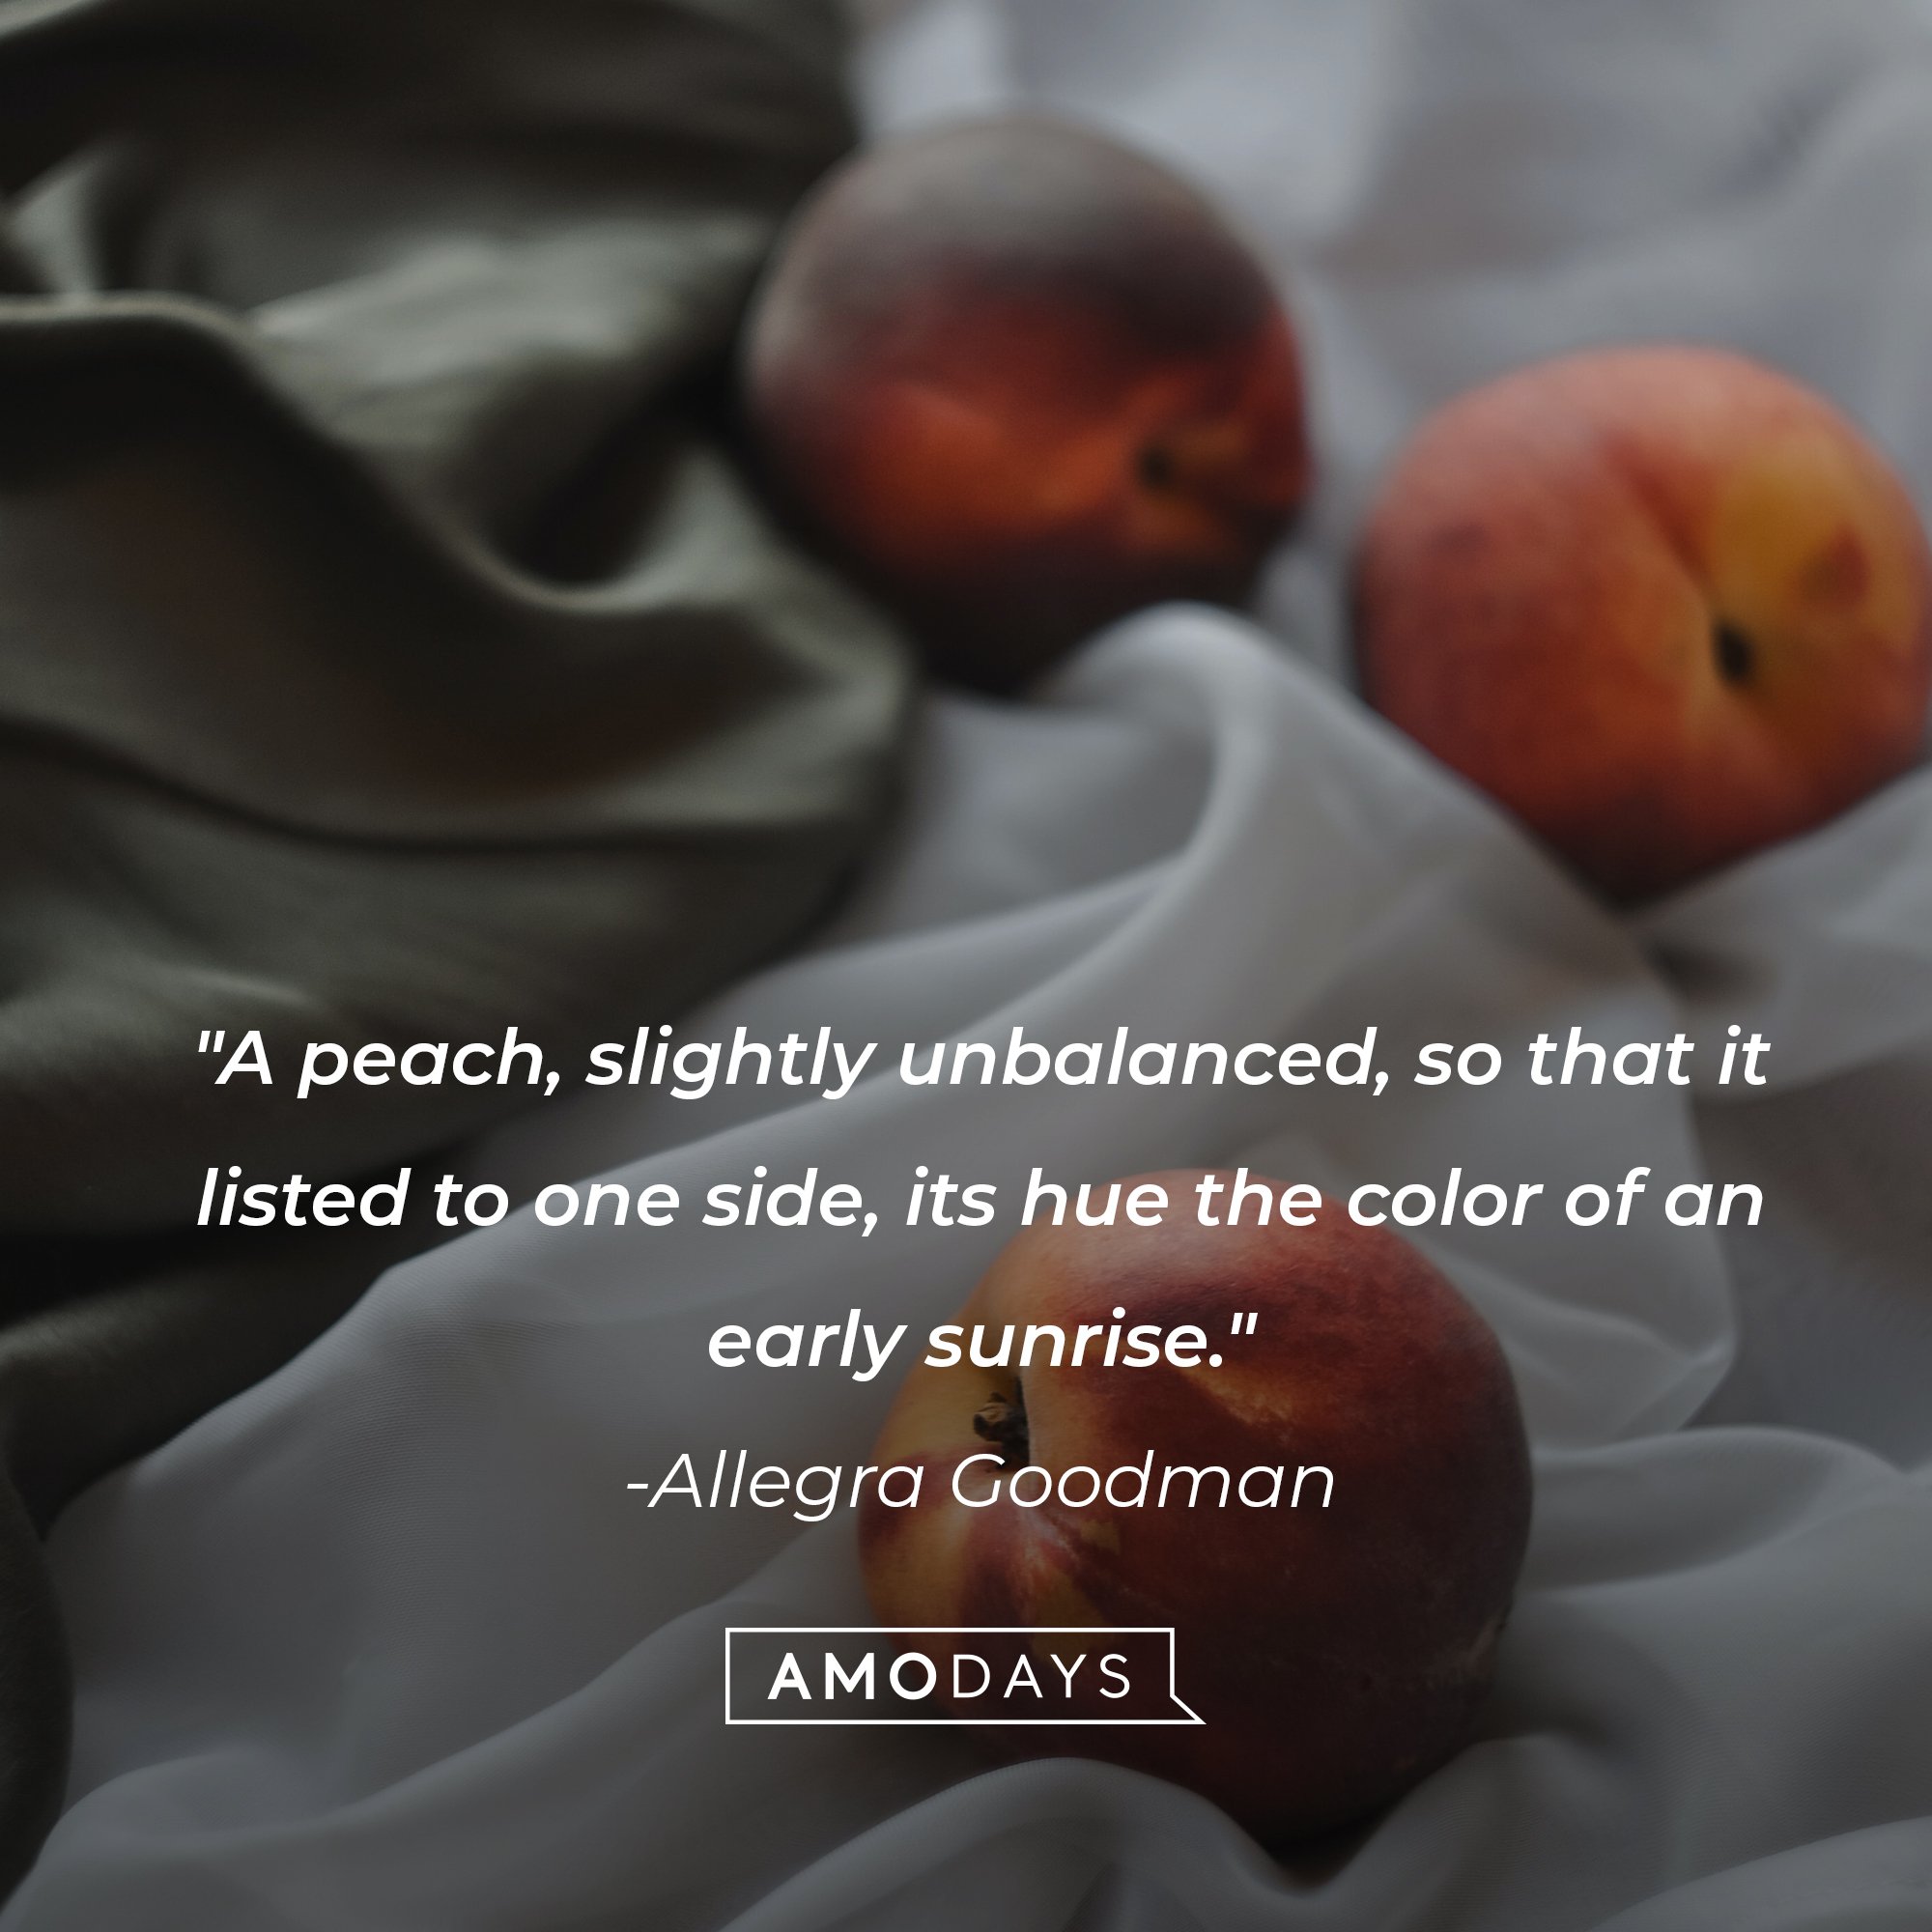 Allegra Goodman's quote: "A peach, slightly unbalanced, so that it listed to one side, its hue the color of an early sunrise." | Image: AmoDays